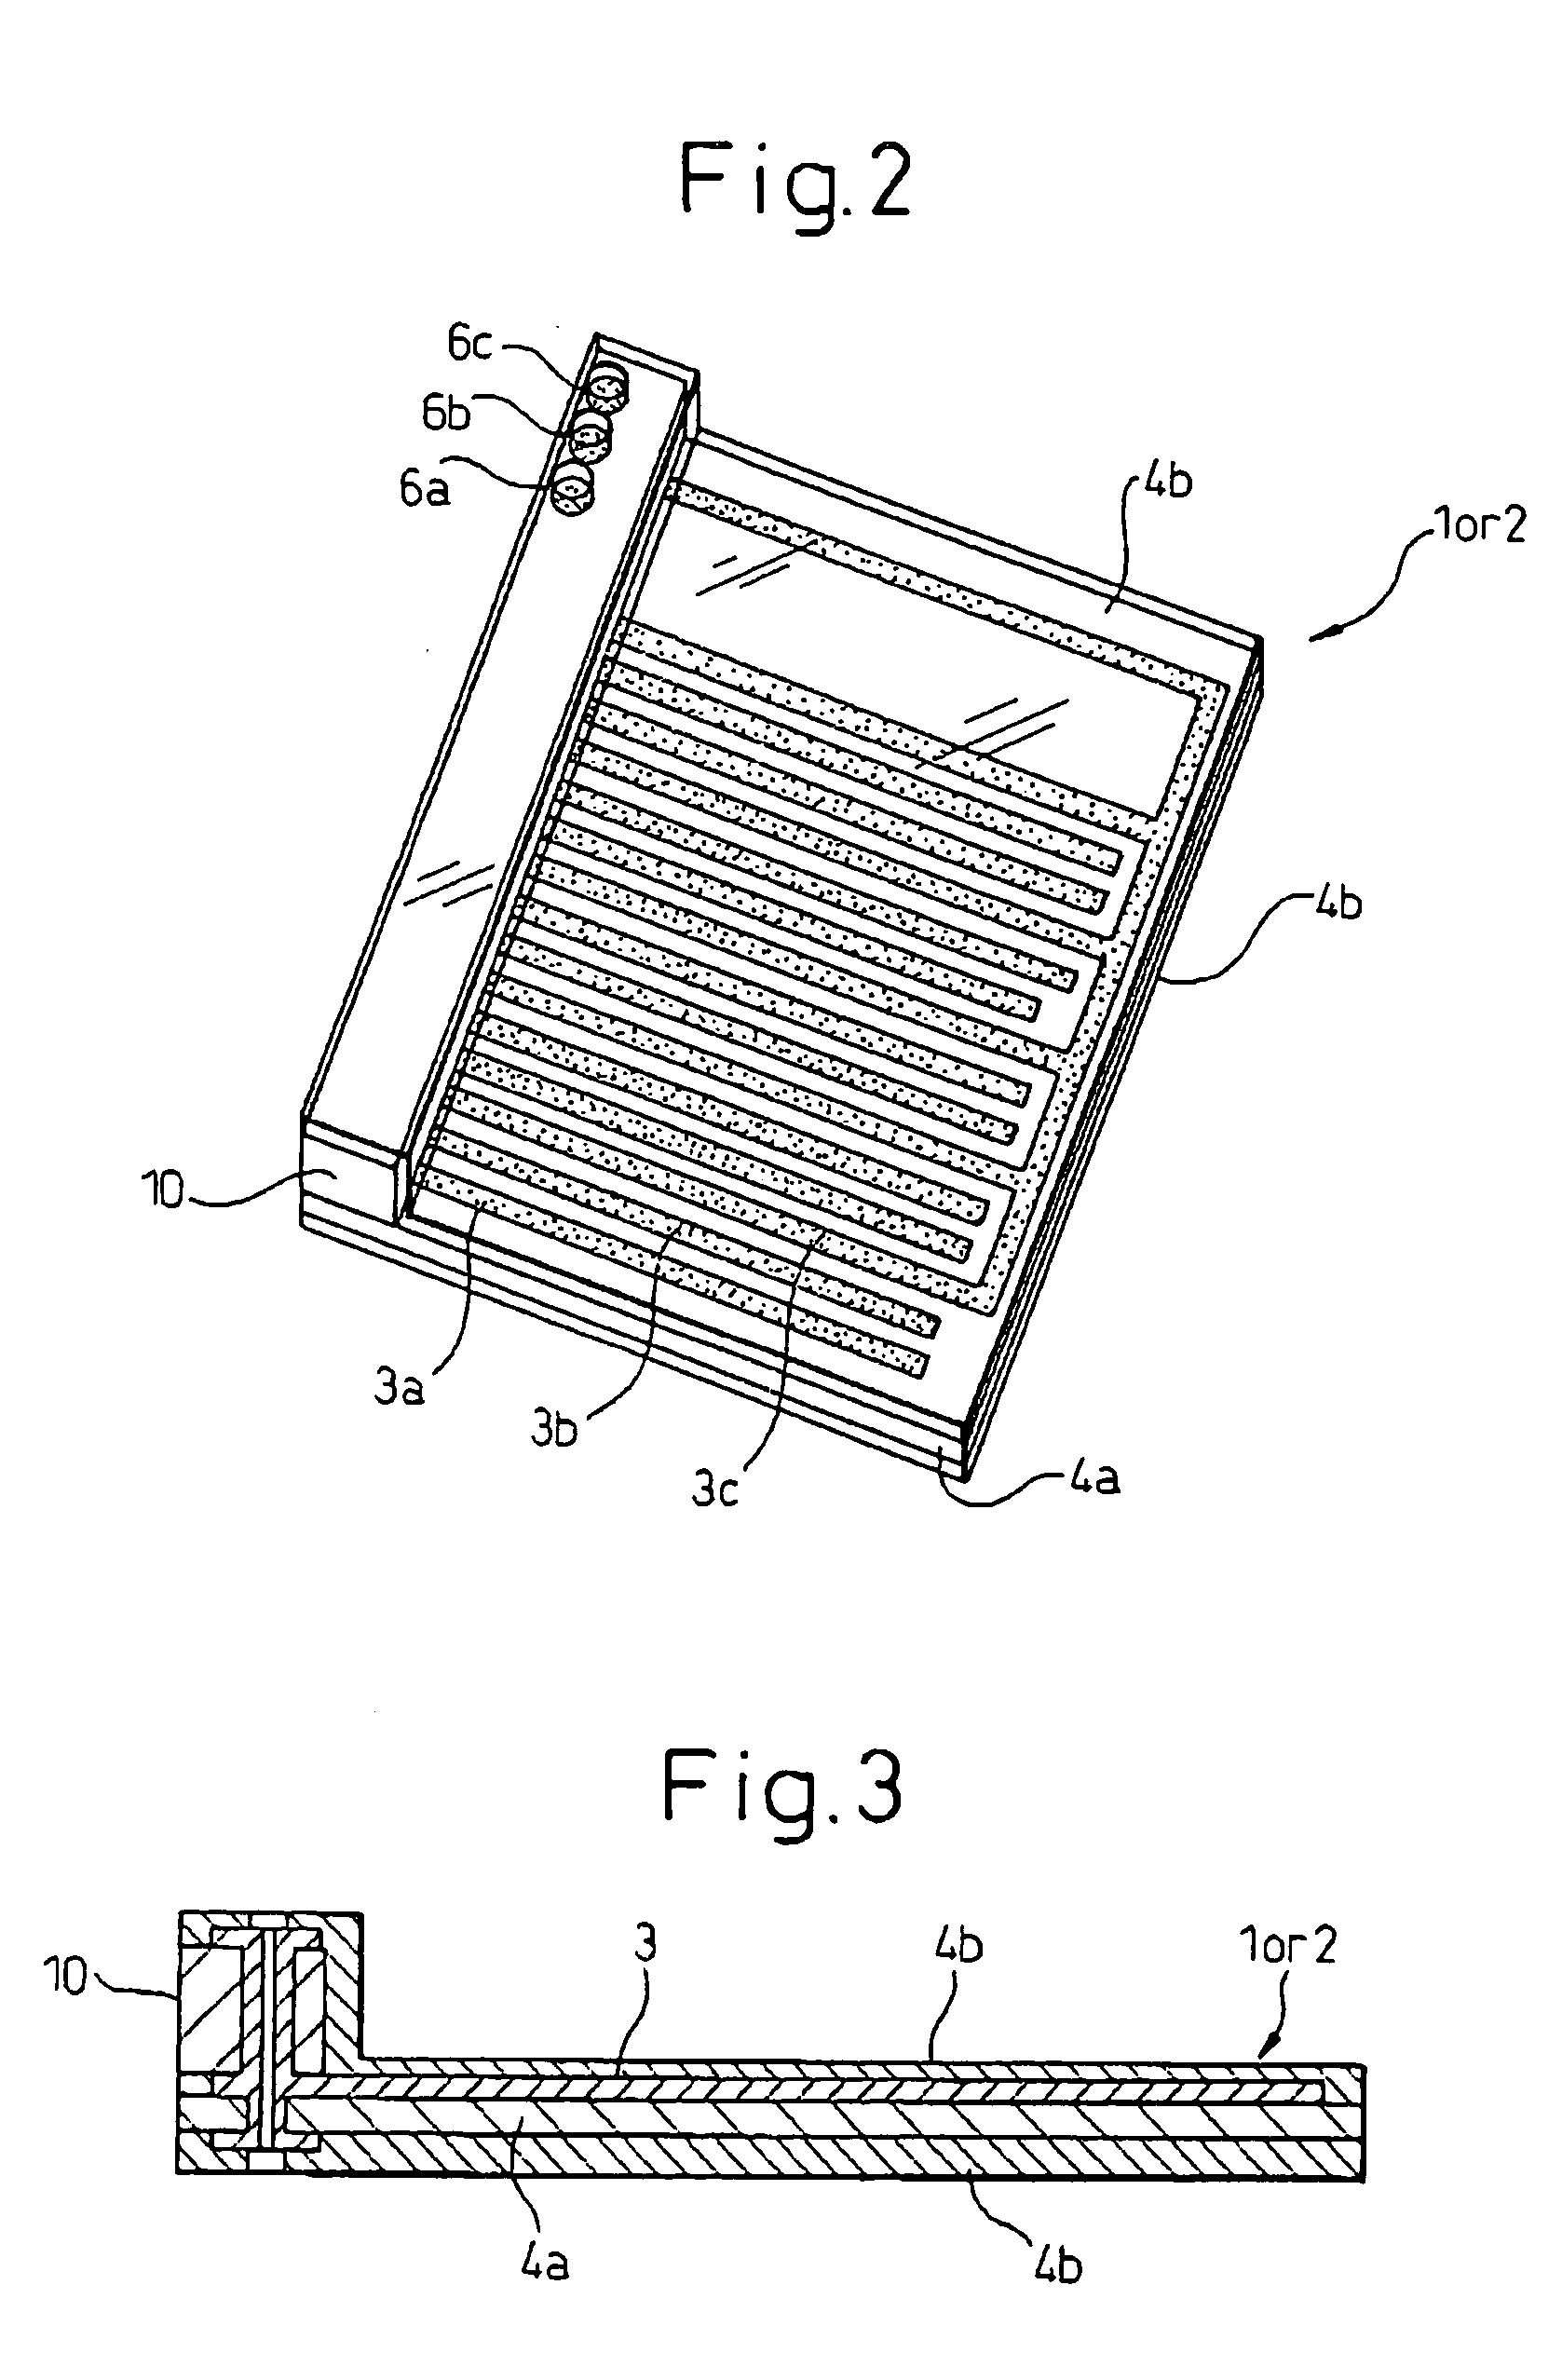 Electrostatic motor utilizing static electricity as a drive force